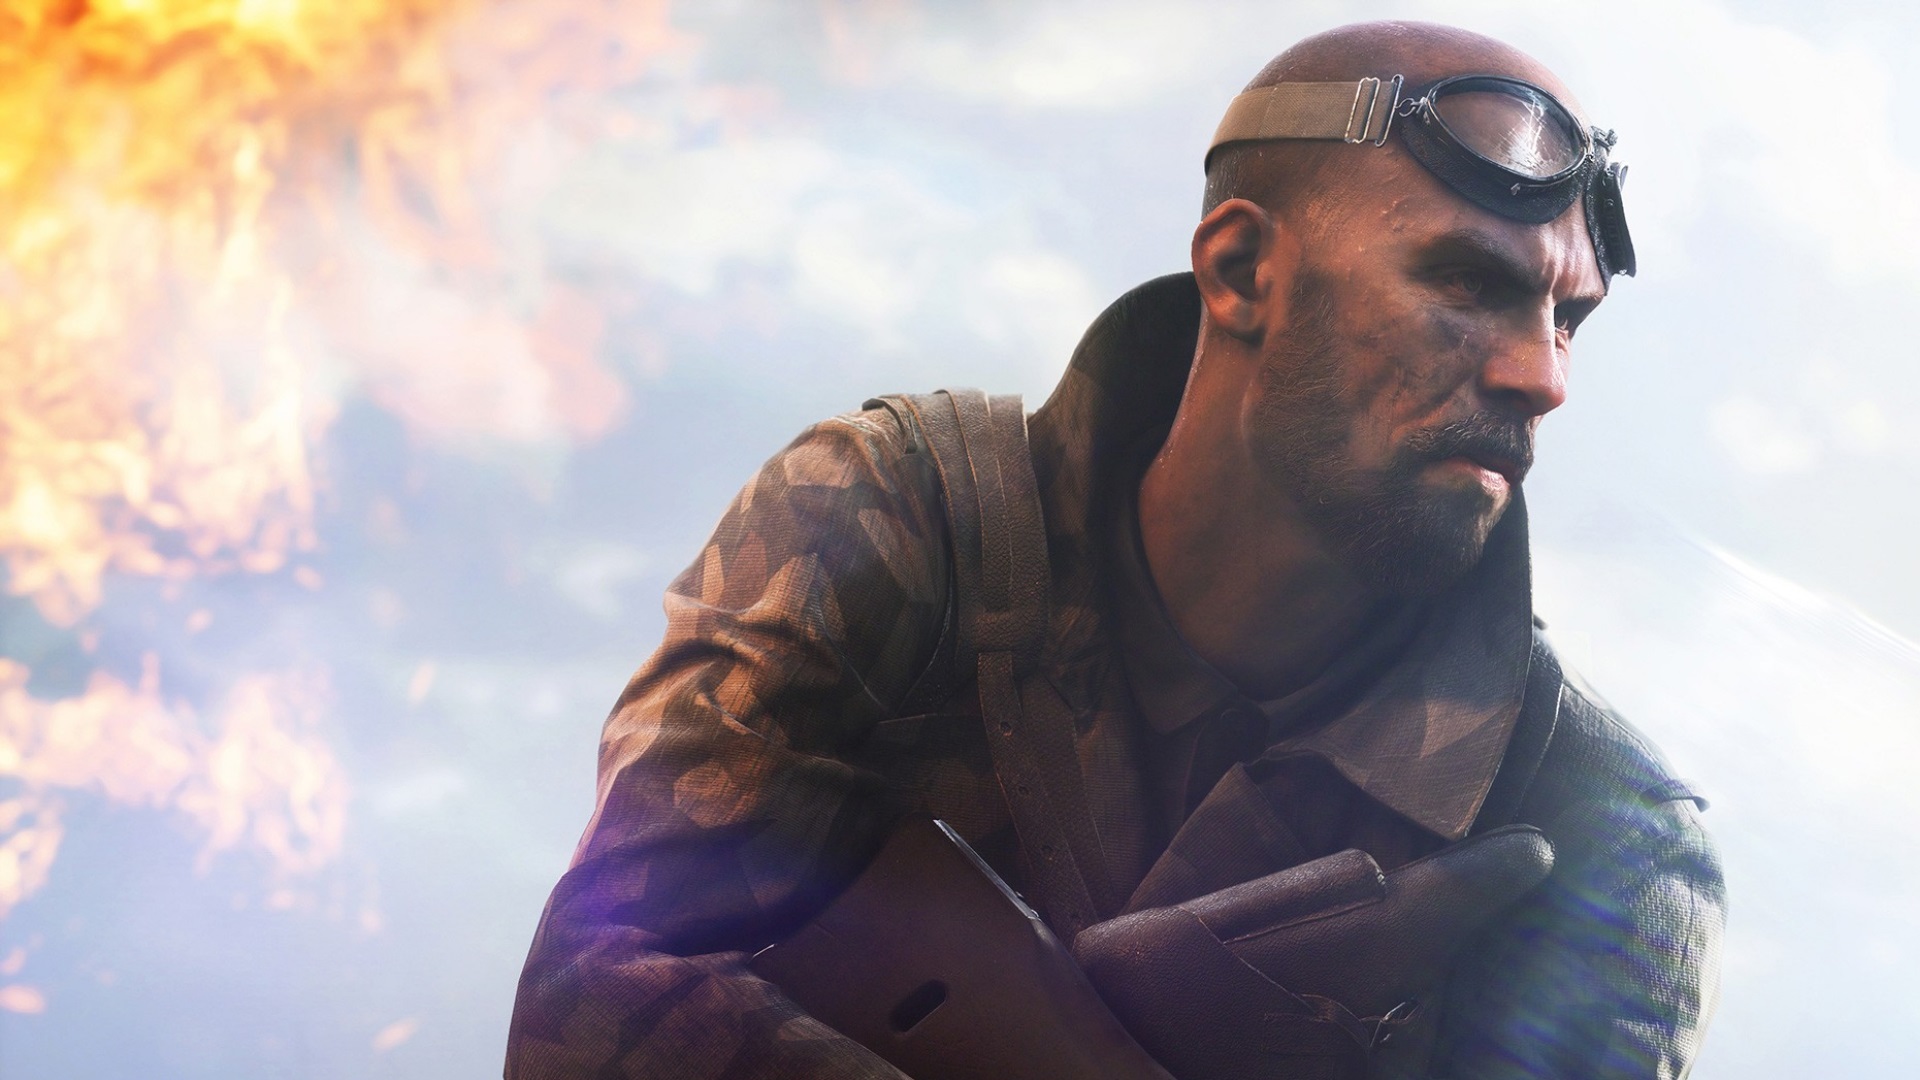 Best war games: Battlefield 5. Image shows a wary-looking soldier with a gun.